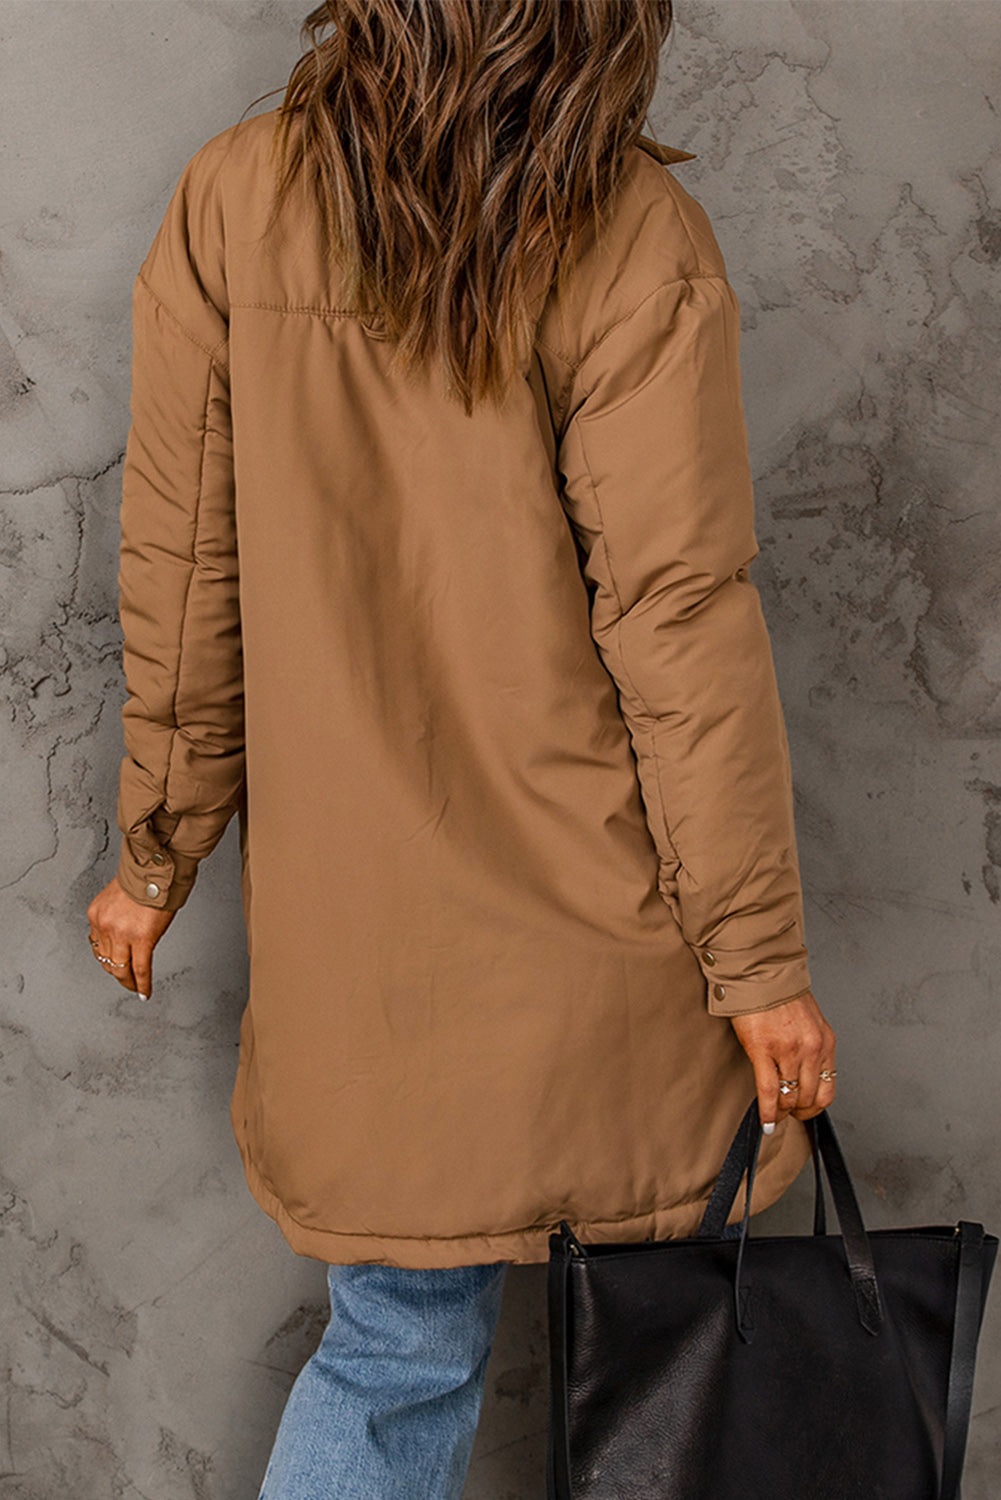 Buy Snap Down Side Slit Jacket with Pockets by Faz